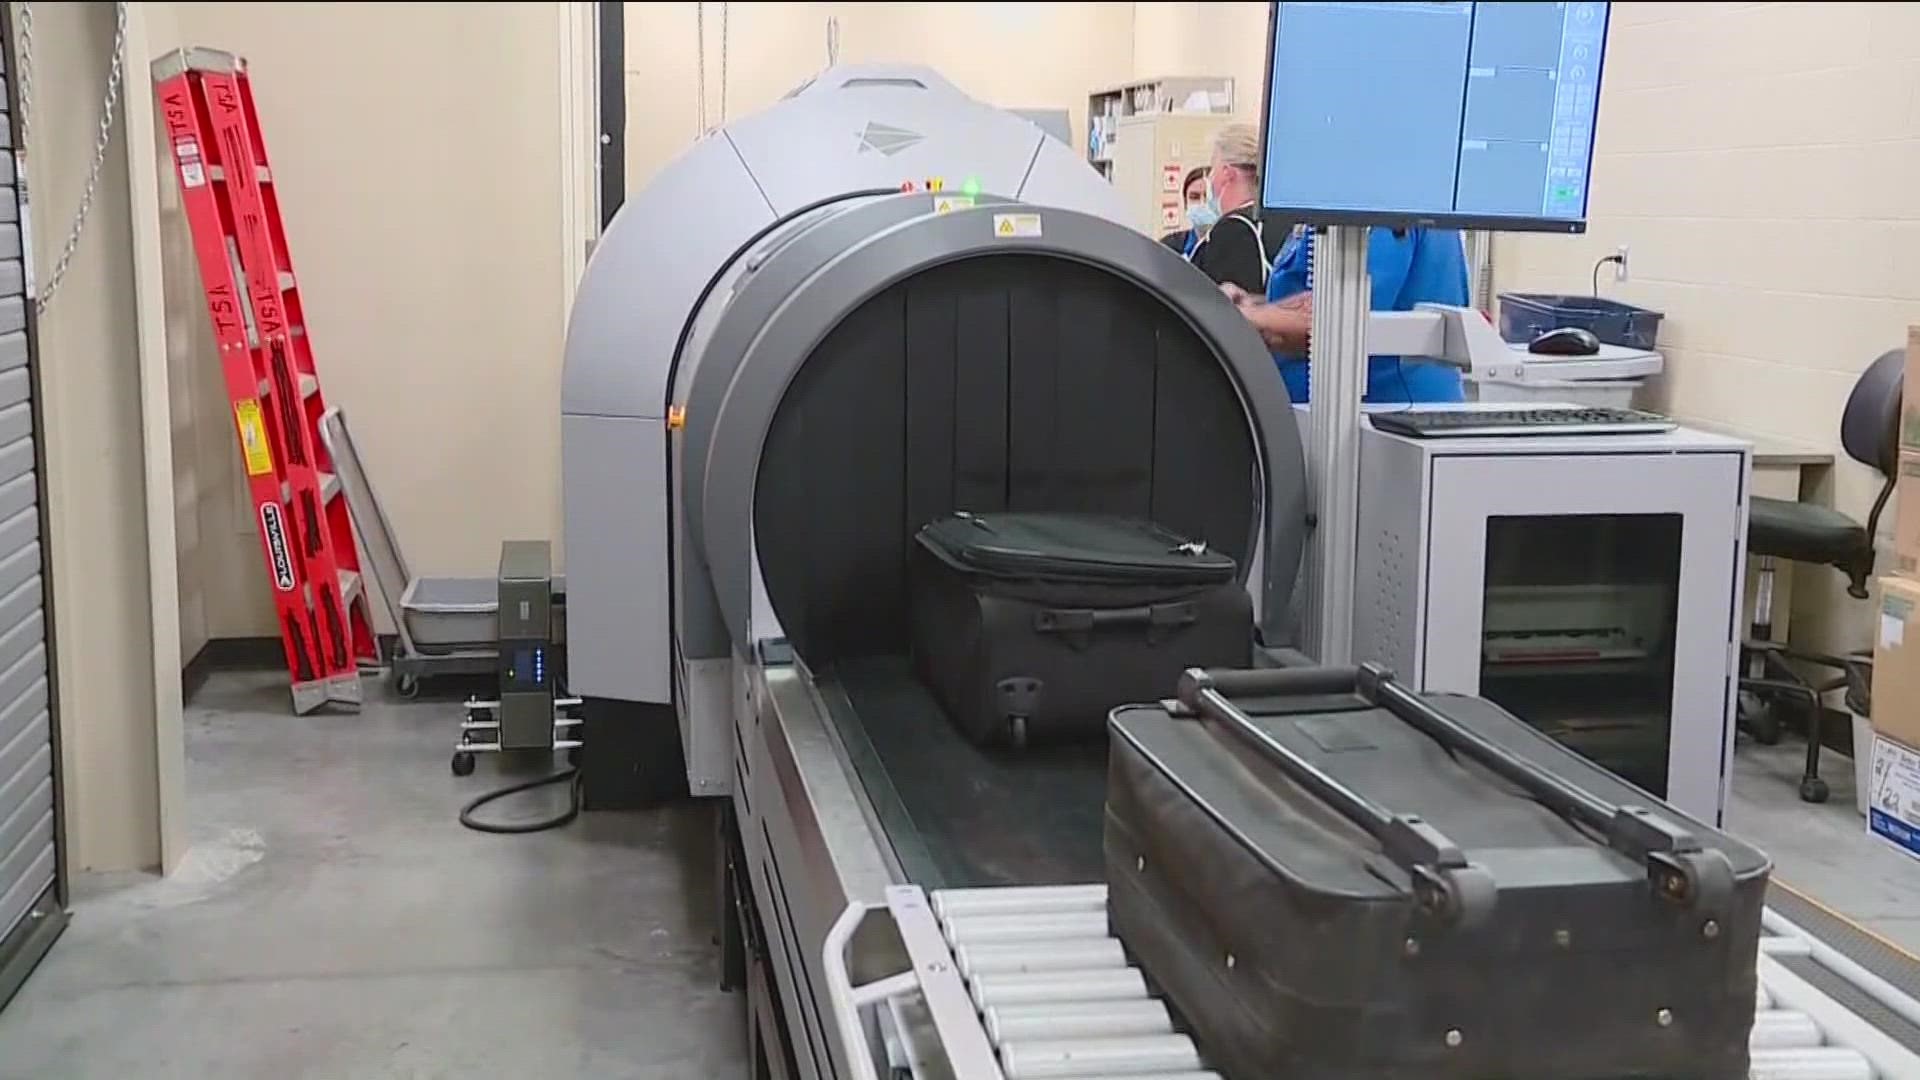 TSA officials hosted a first-hand look at the new computed tomography scanner, which will now automate all checked baggage screening operations.